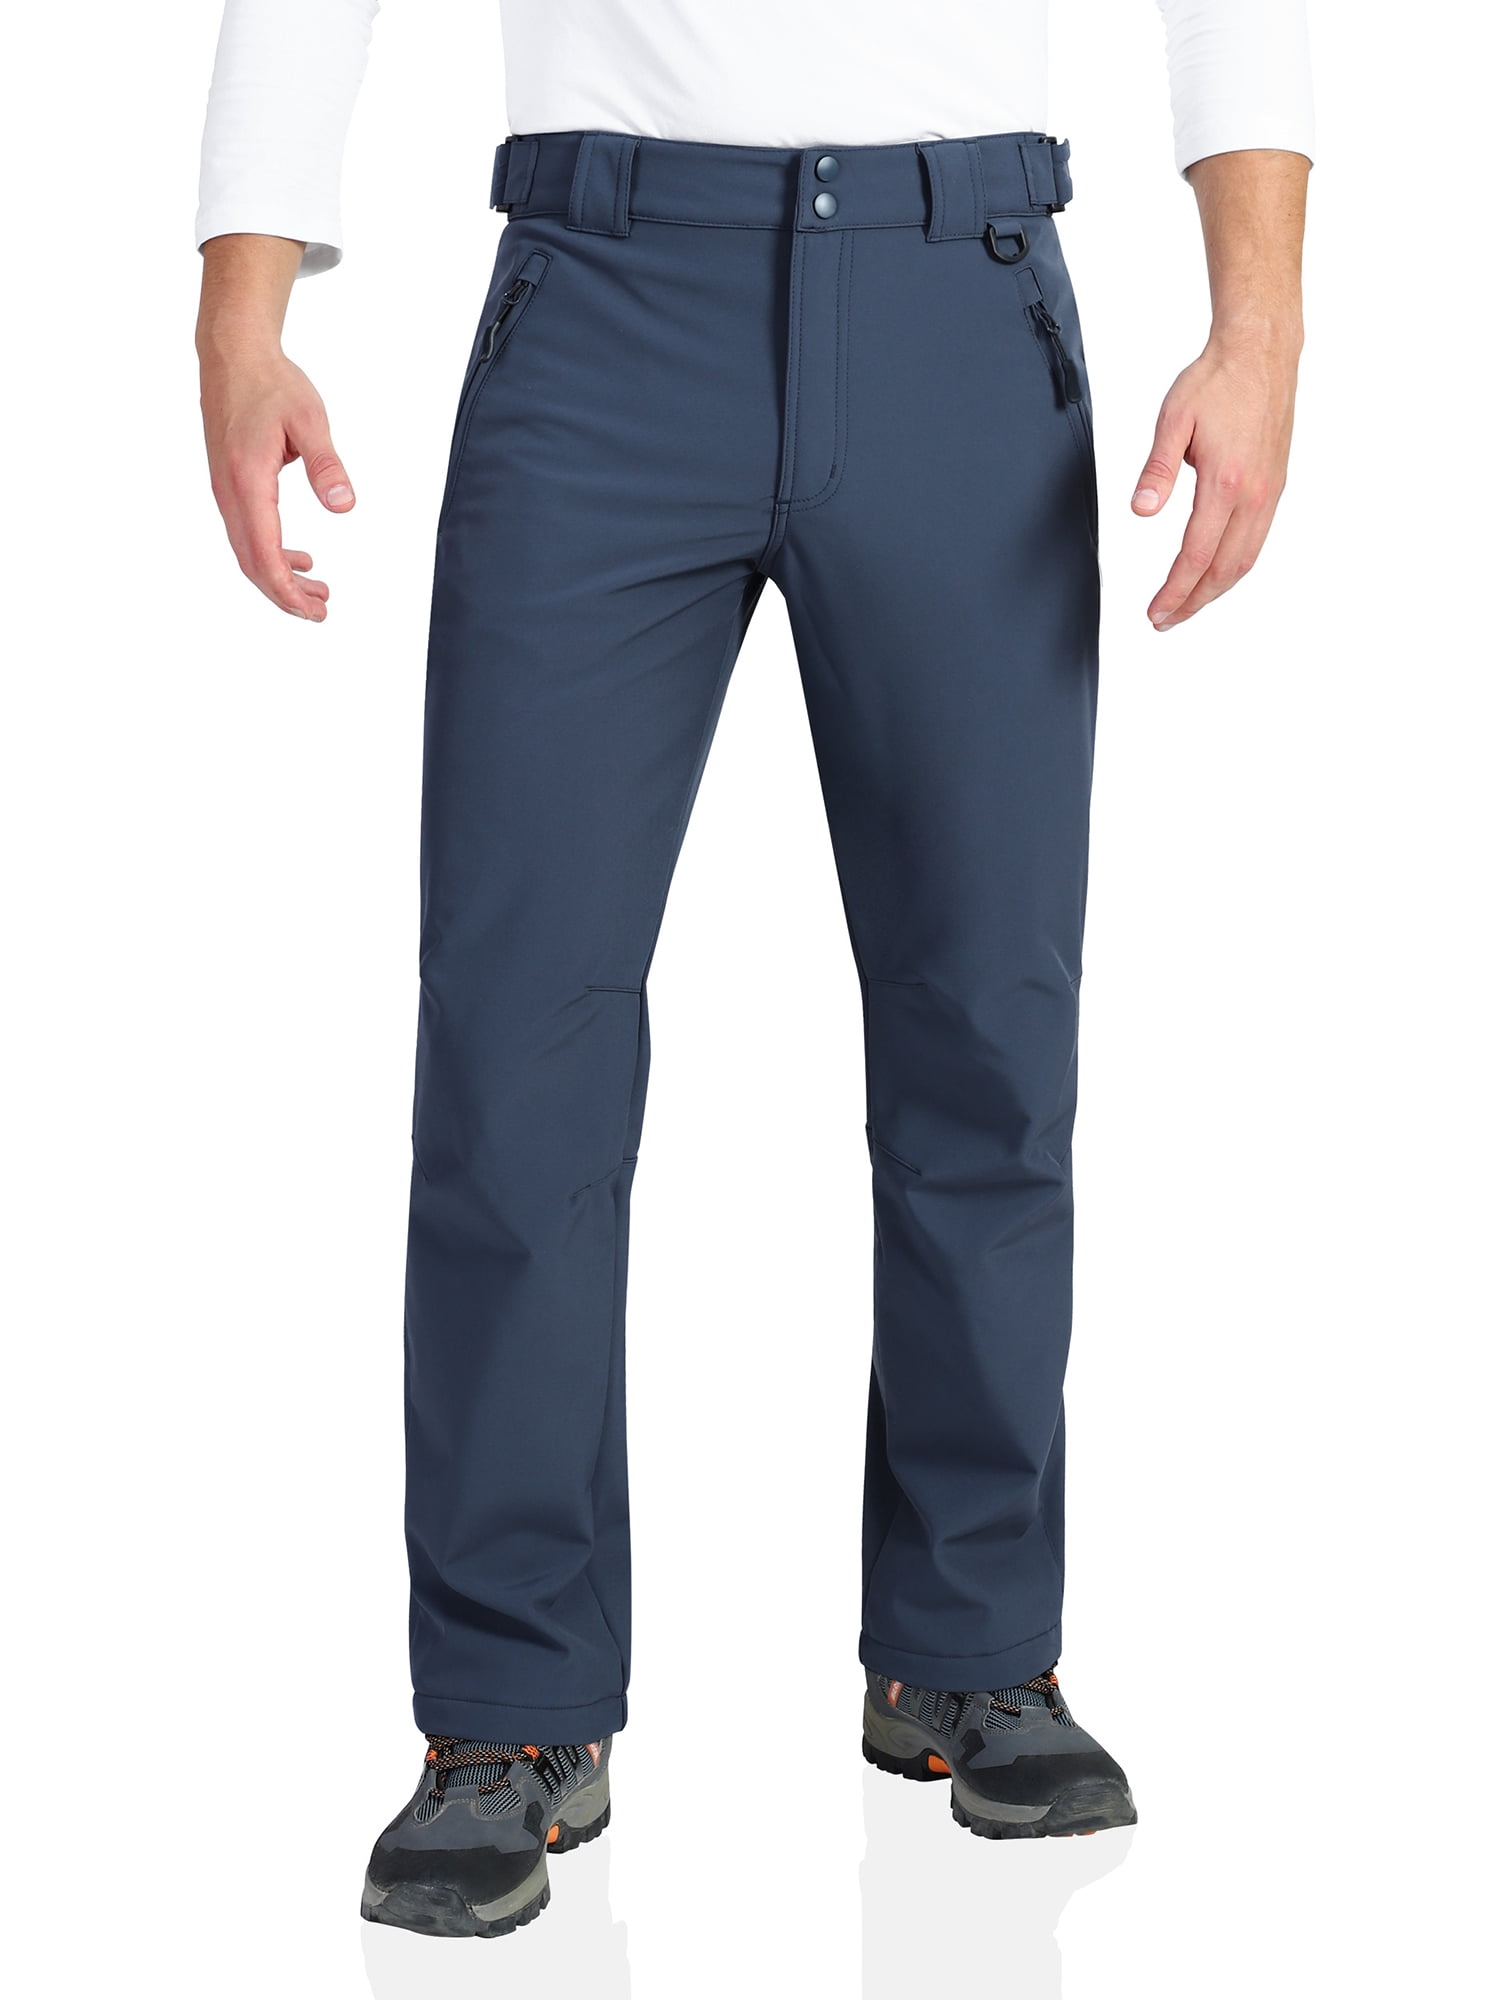   Essentials Men's Water-Resistant Insulated Snow Pant,  Black, X-Small : Clothing, Shoes & Jewelry